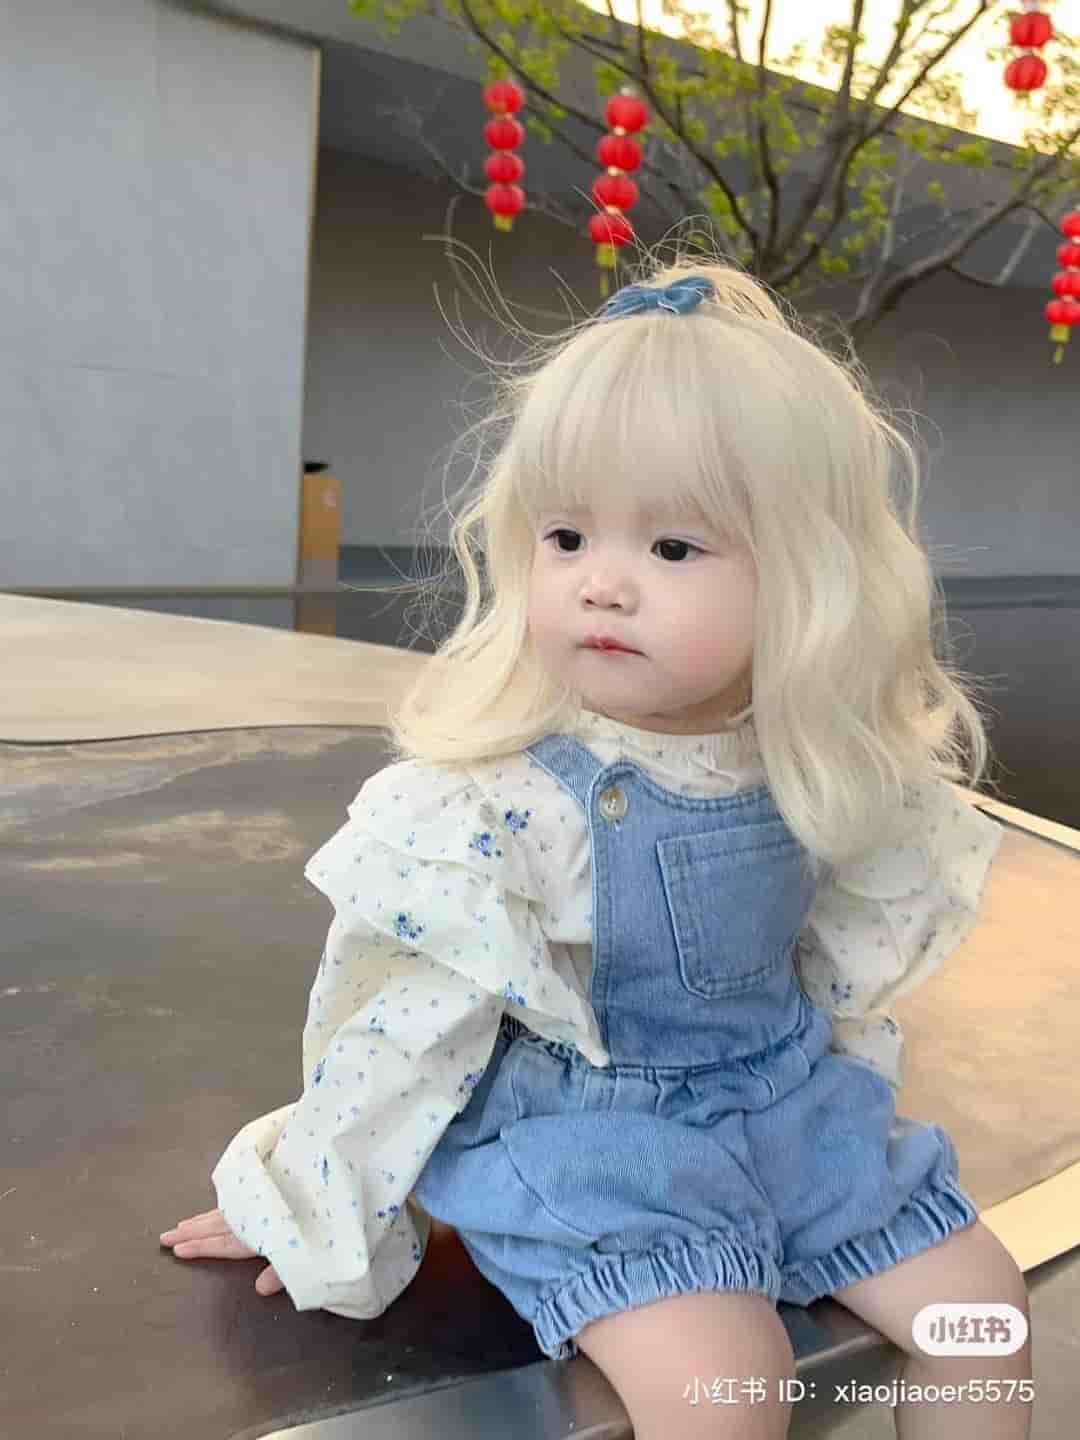 Let’s look at the baby. Attracts the online community thanks to her unique hair color and doll-like appearance